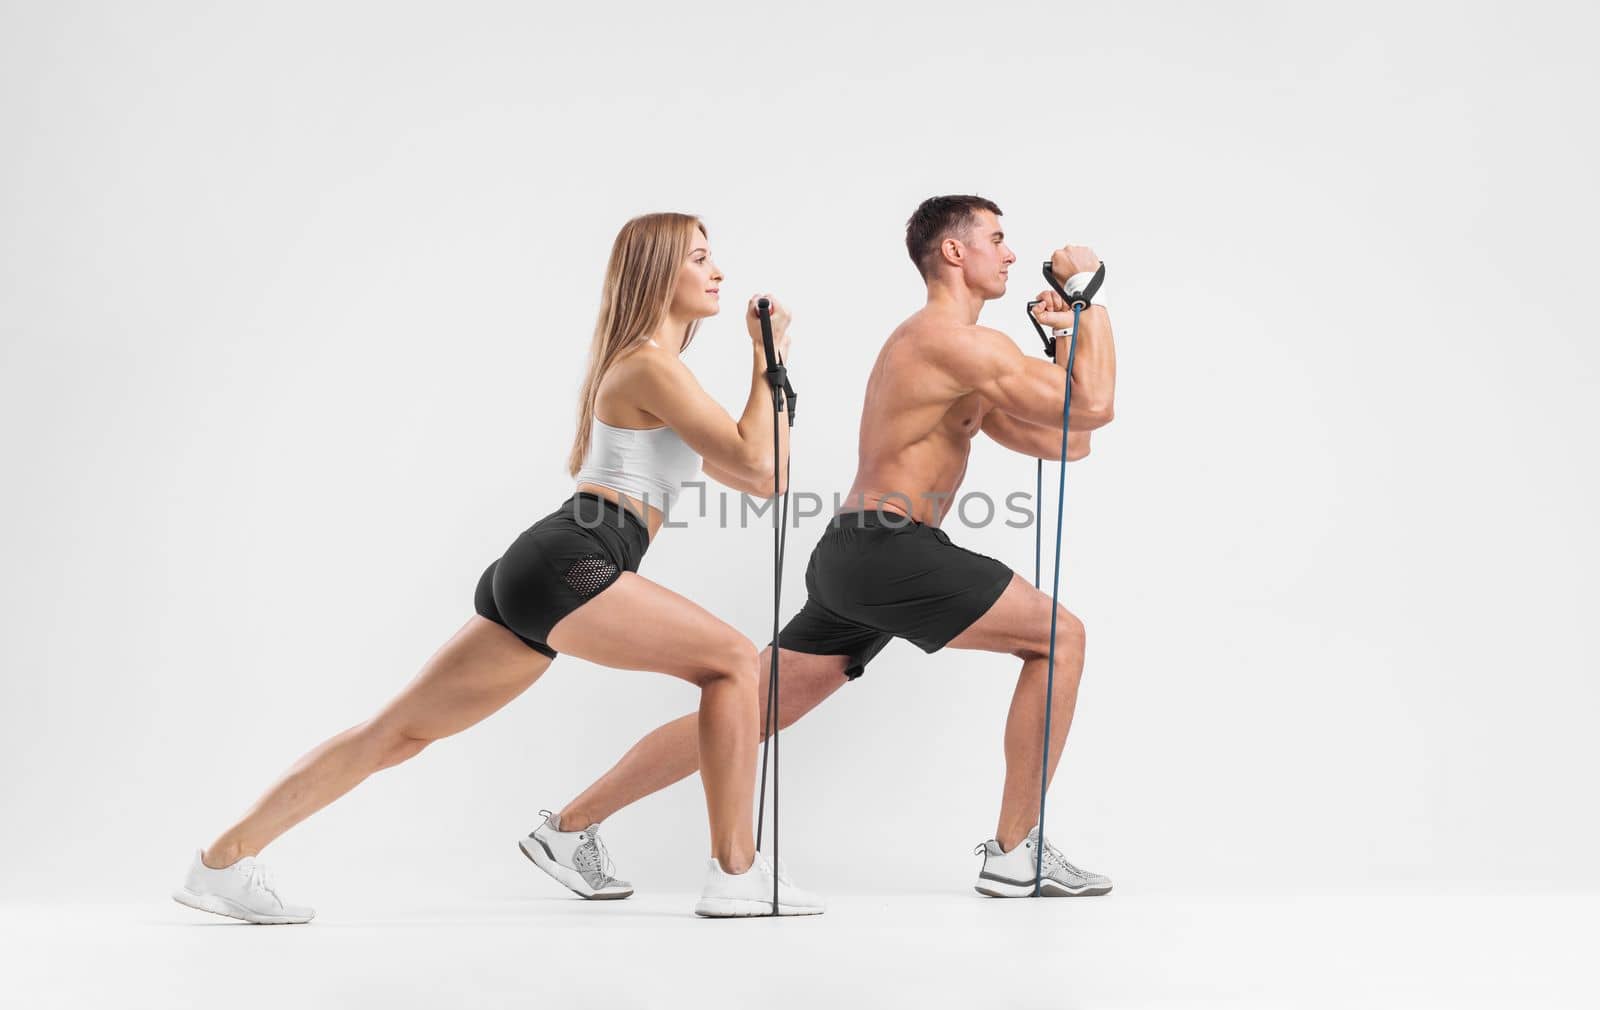 Fit couple at the gym isolated on white background. Fitness concept. Healthy life style